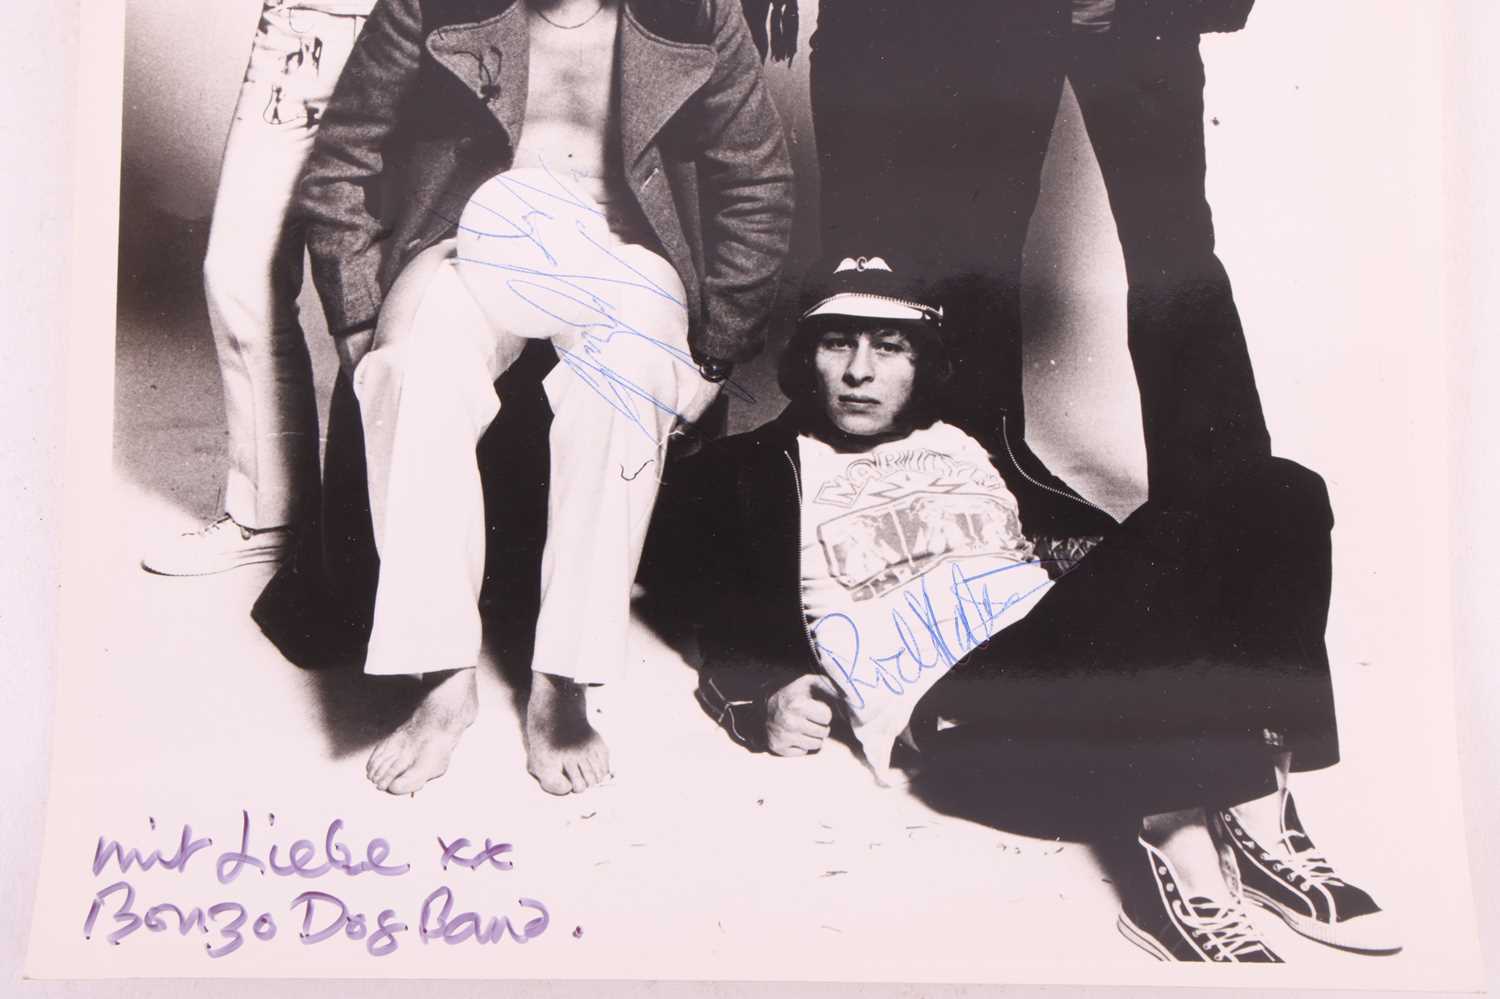 The Bonzo Dog Doo-Dah Band: a fully signed black and white photograph of the band, with the signatur - Image 3 of 3